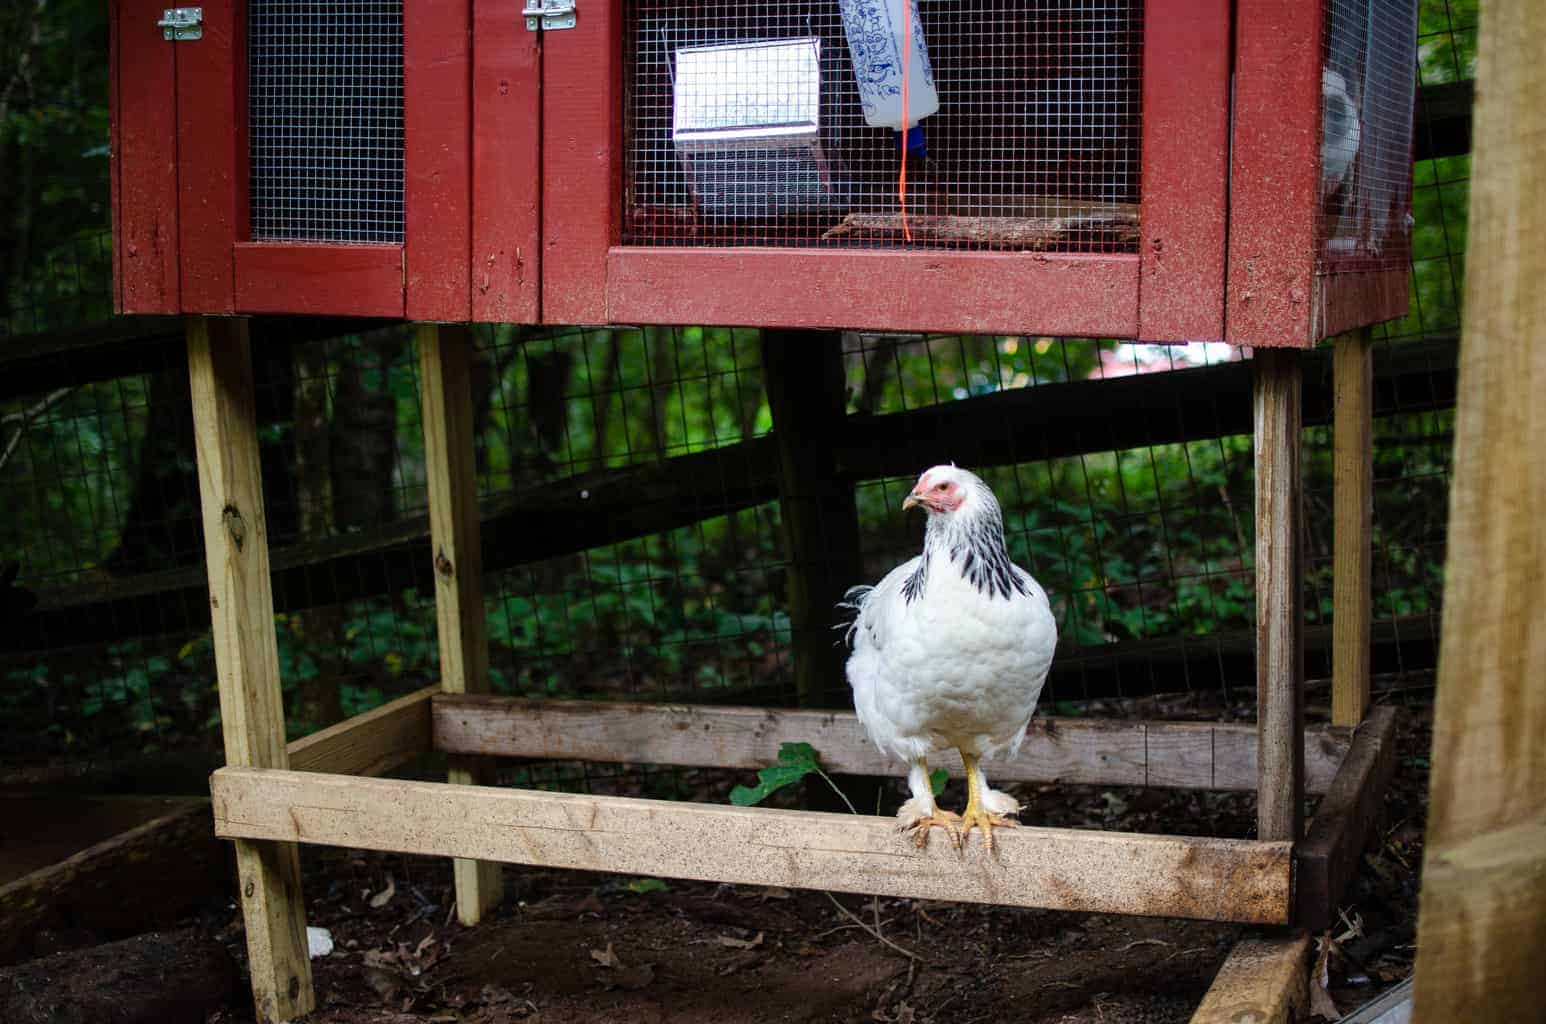 Are pumpkin seeds a natural dewormer for chickens? Let's talk about the truth!